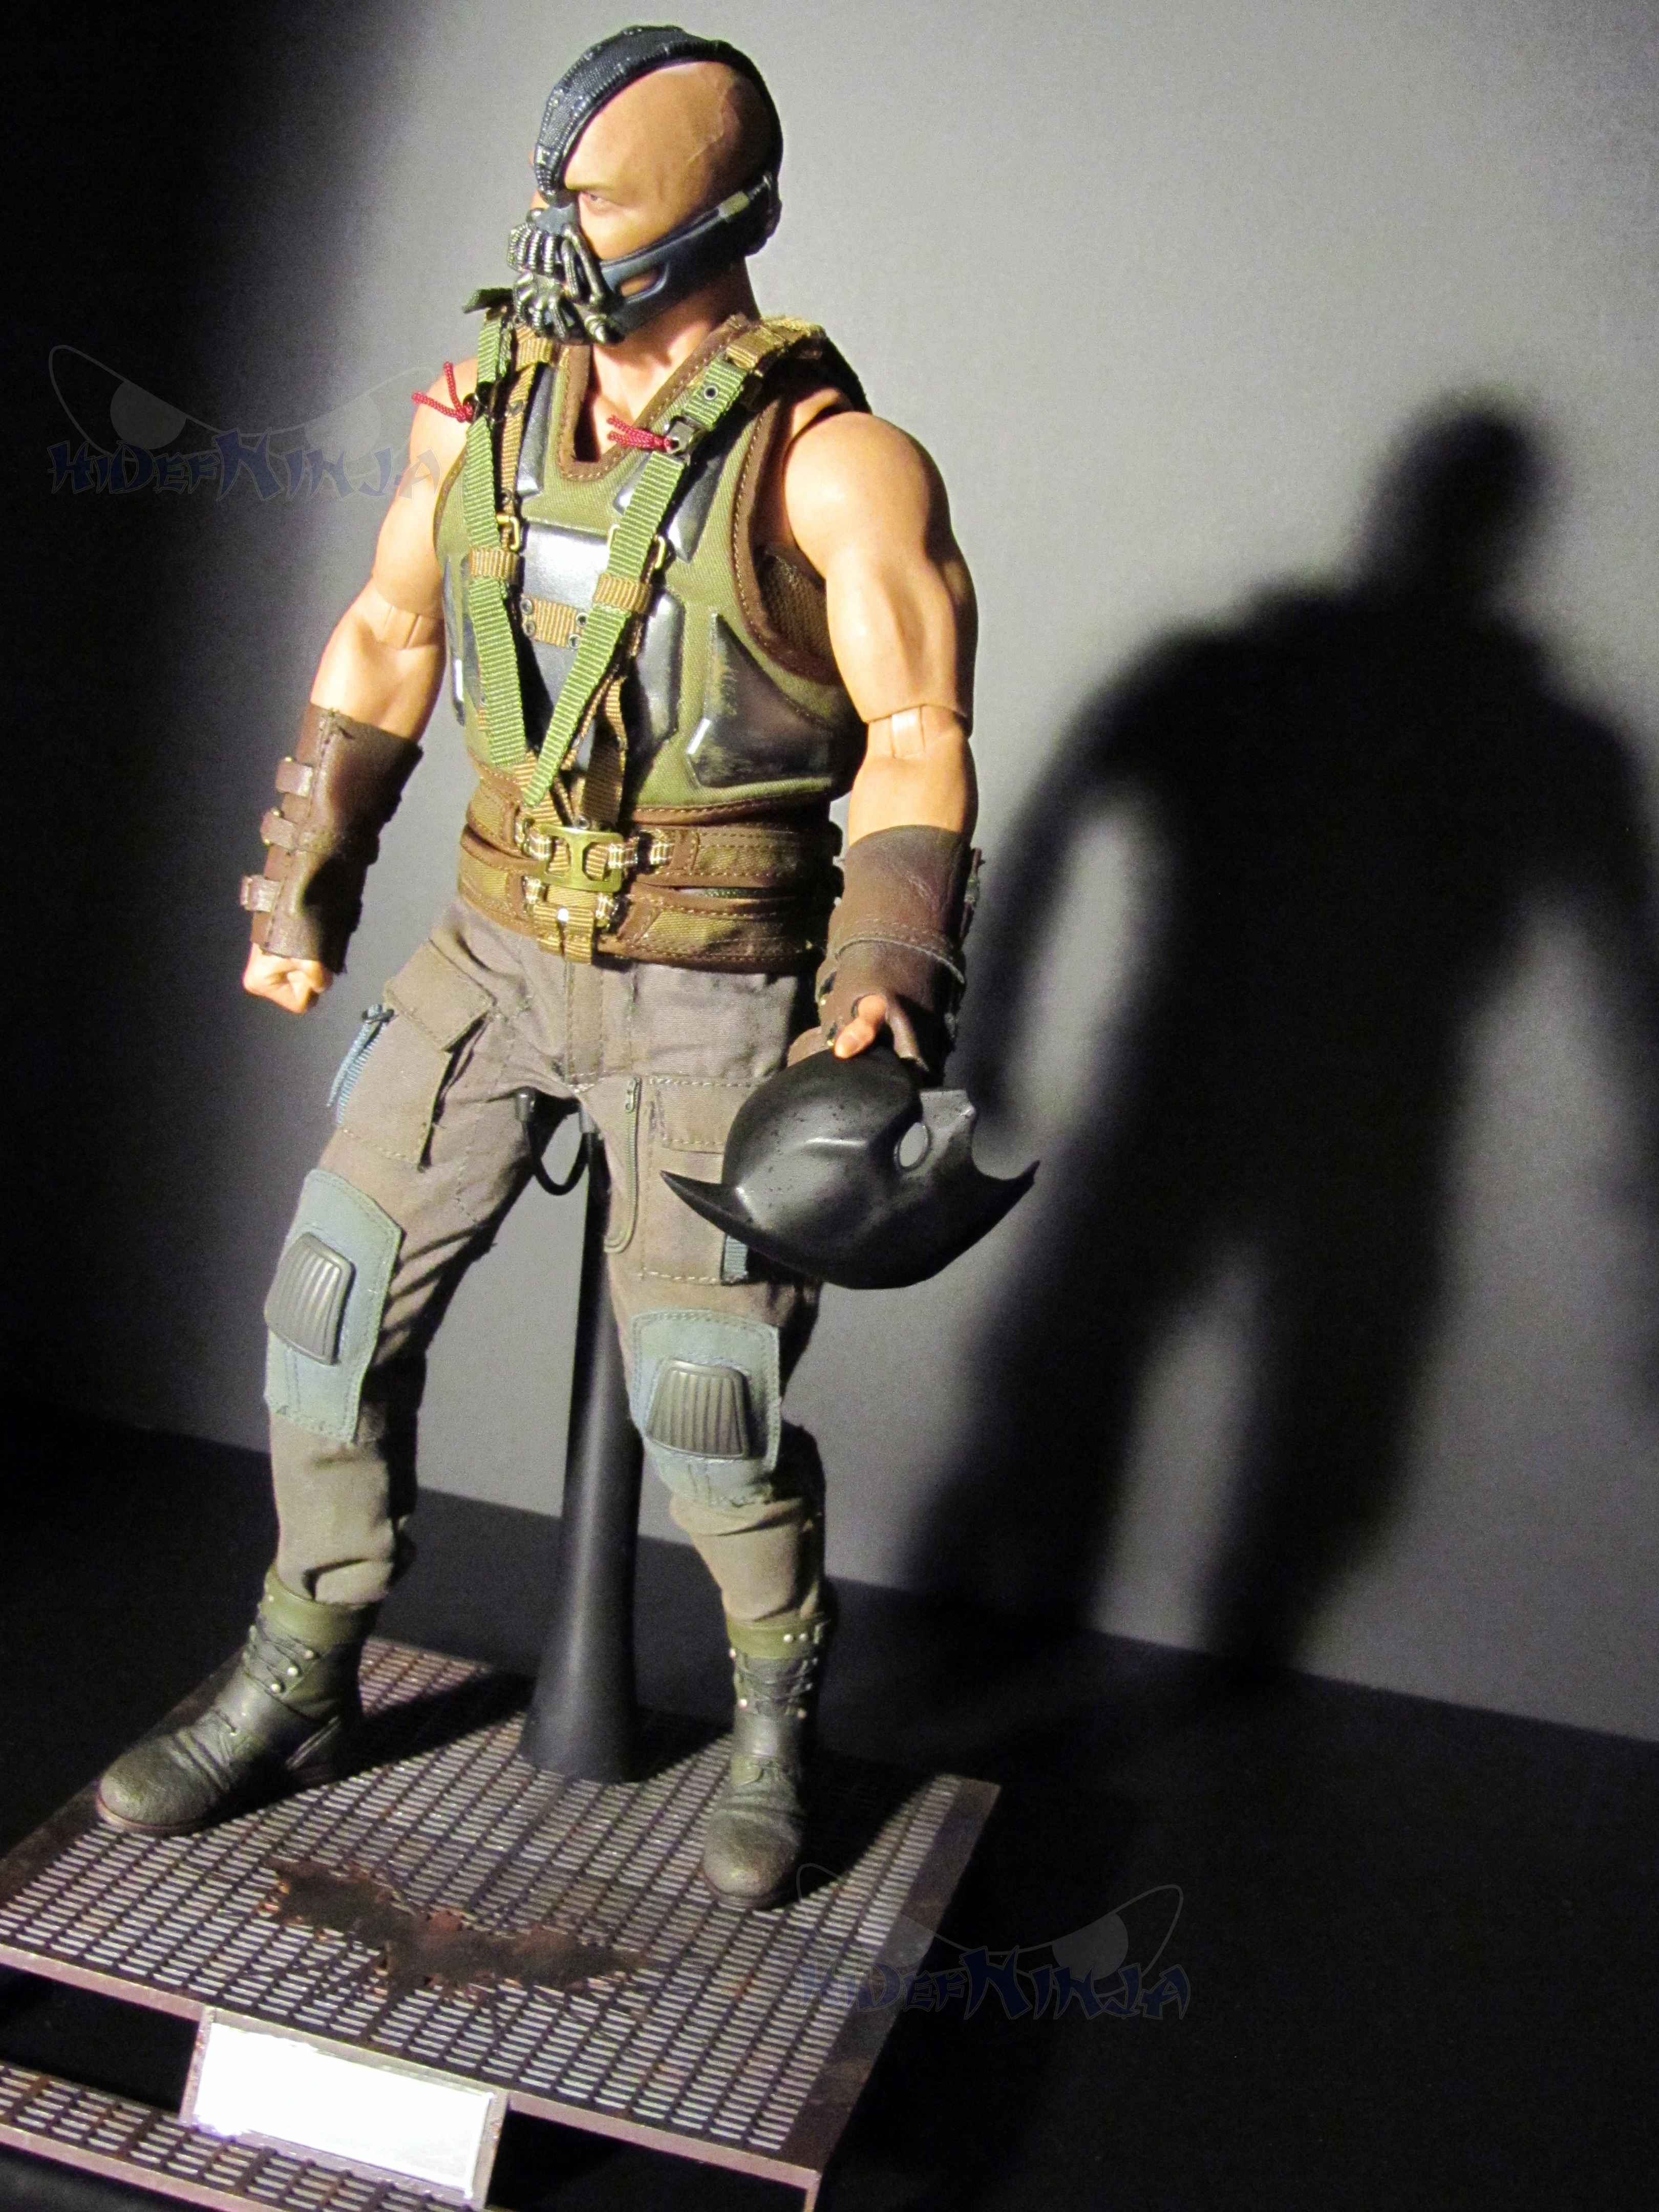 The Dark Knight Rises Bane 1/6 Scale Figure Returns to Hot Toys